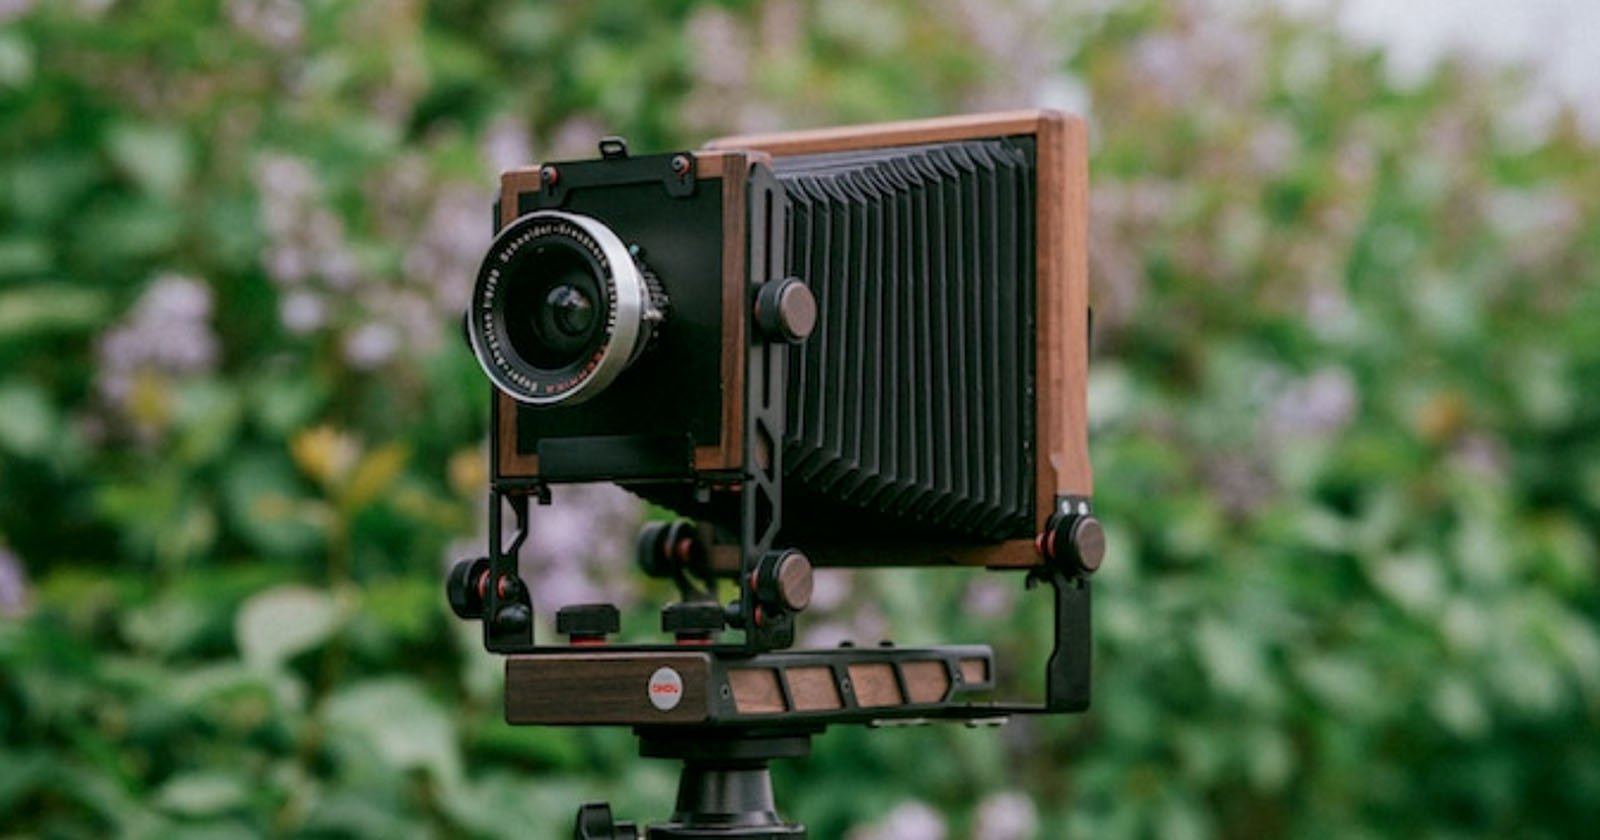 Ondu Eikan is a Modular Large Format Camera Designed to Grow With You